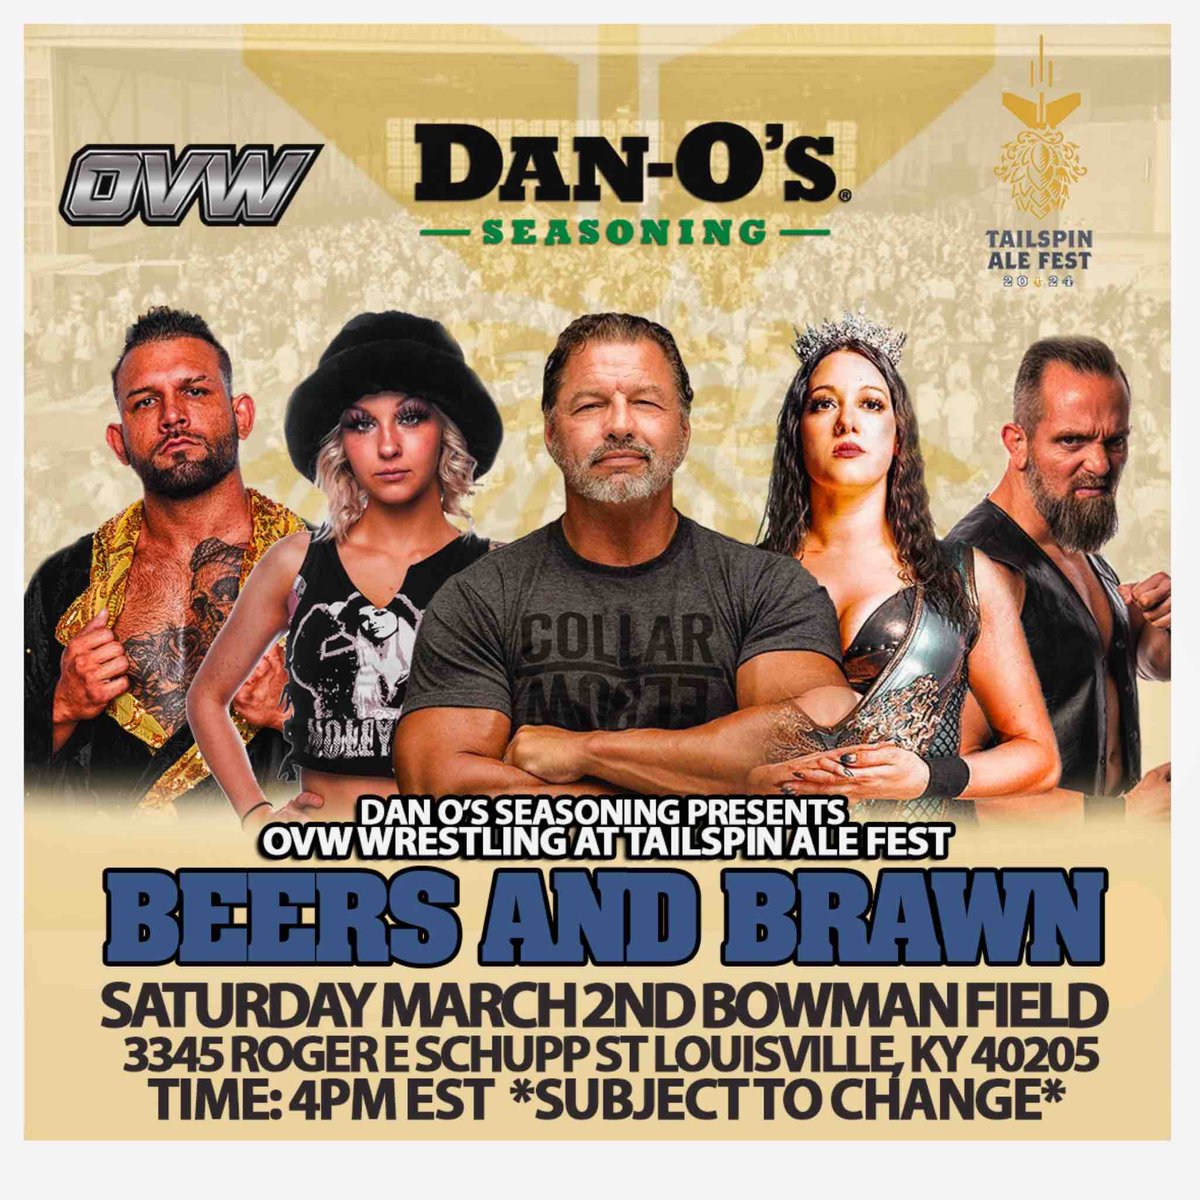 OVW is on the road with @DanOsSeasoning and we want you there! 2/23 - Lexington, KY - Manchester Music Hall 2/25 - Indianapolis, In - Irving Theater 3/2 - Tailspin Ale Fest at Bowman Field Tickets and info at OVWTix.com #OVWwrestling #OVWLive #WrestlersNetflix